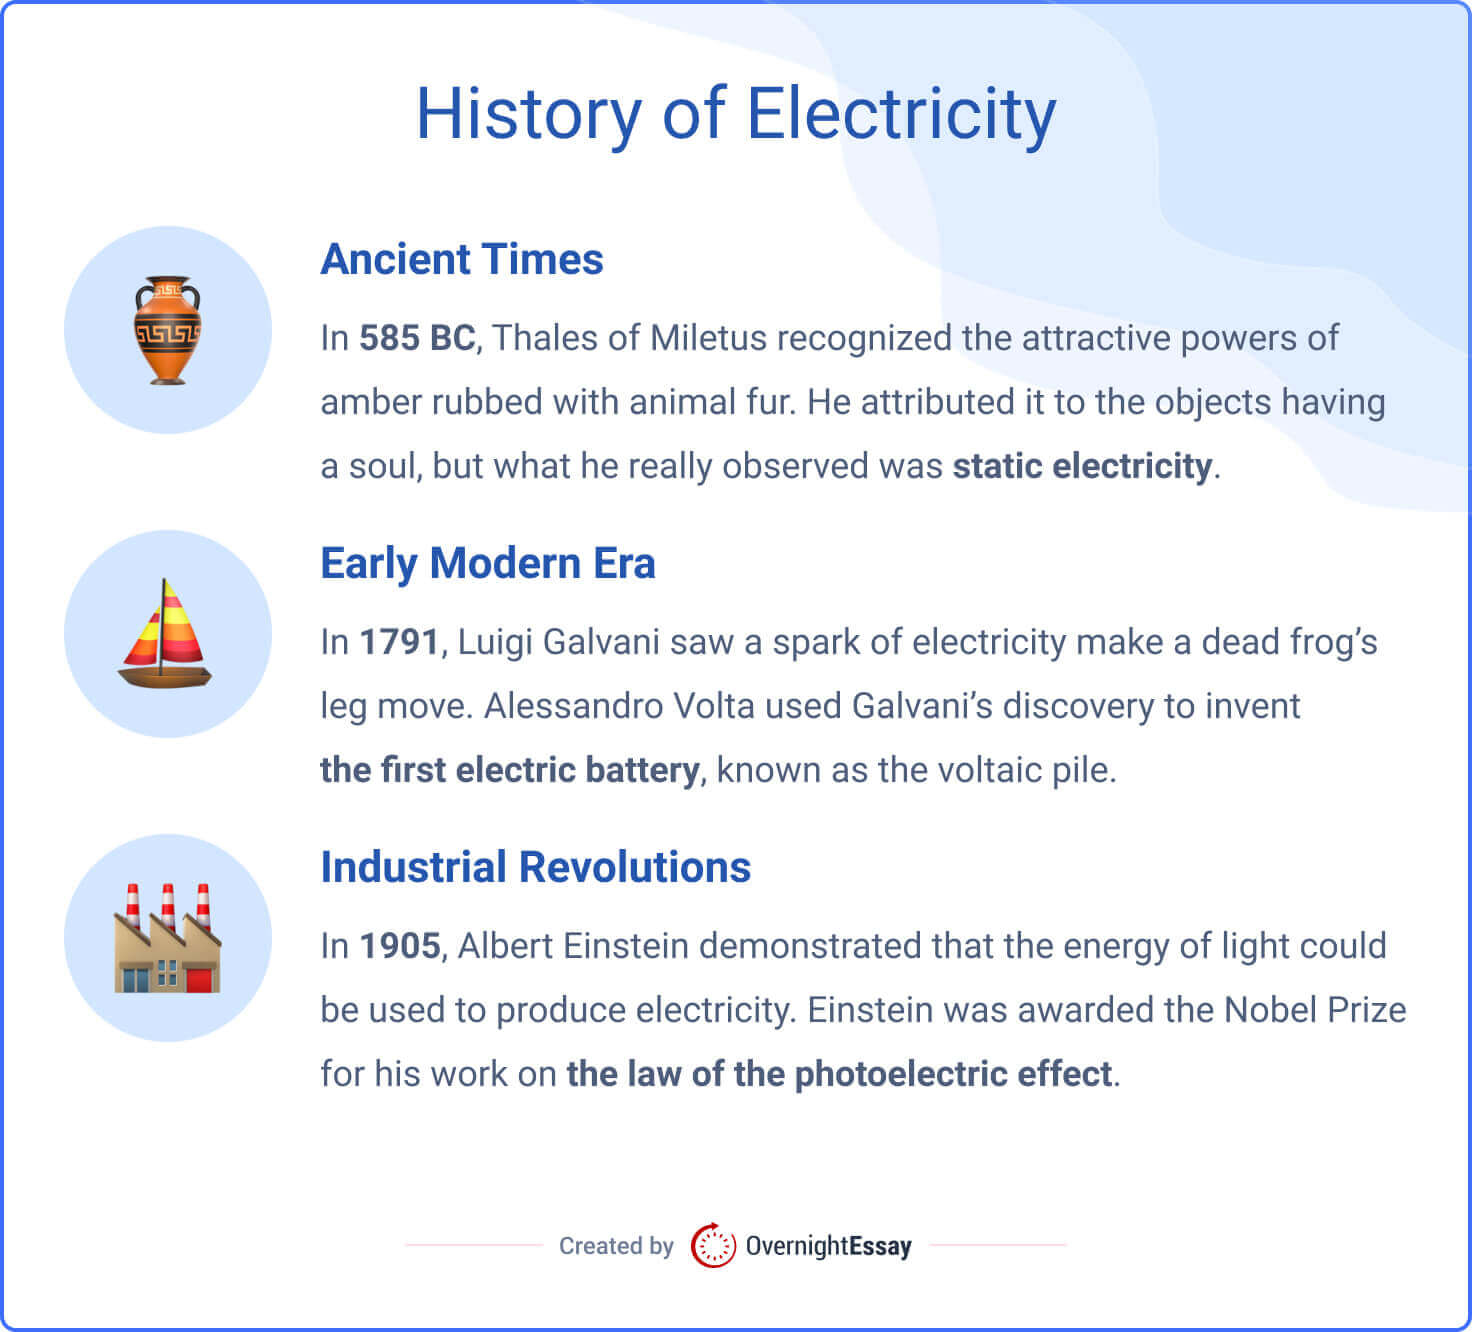 The picture contains three main stages in  the history of electricity.